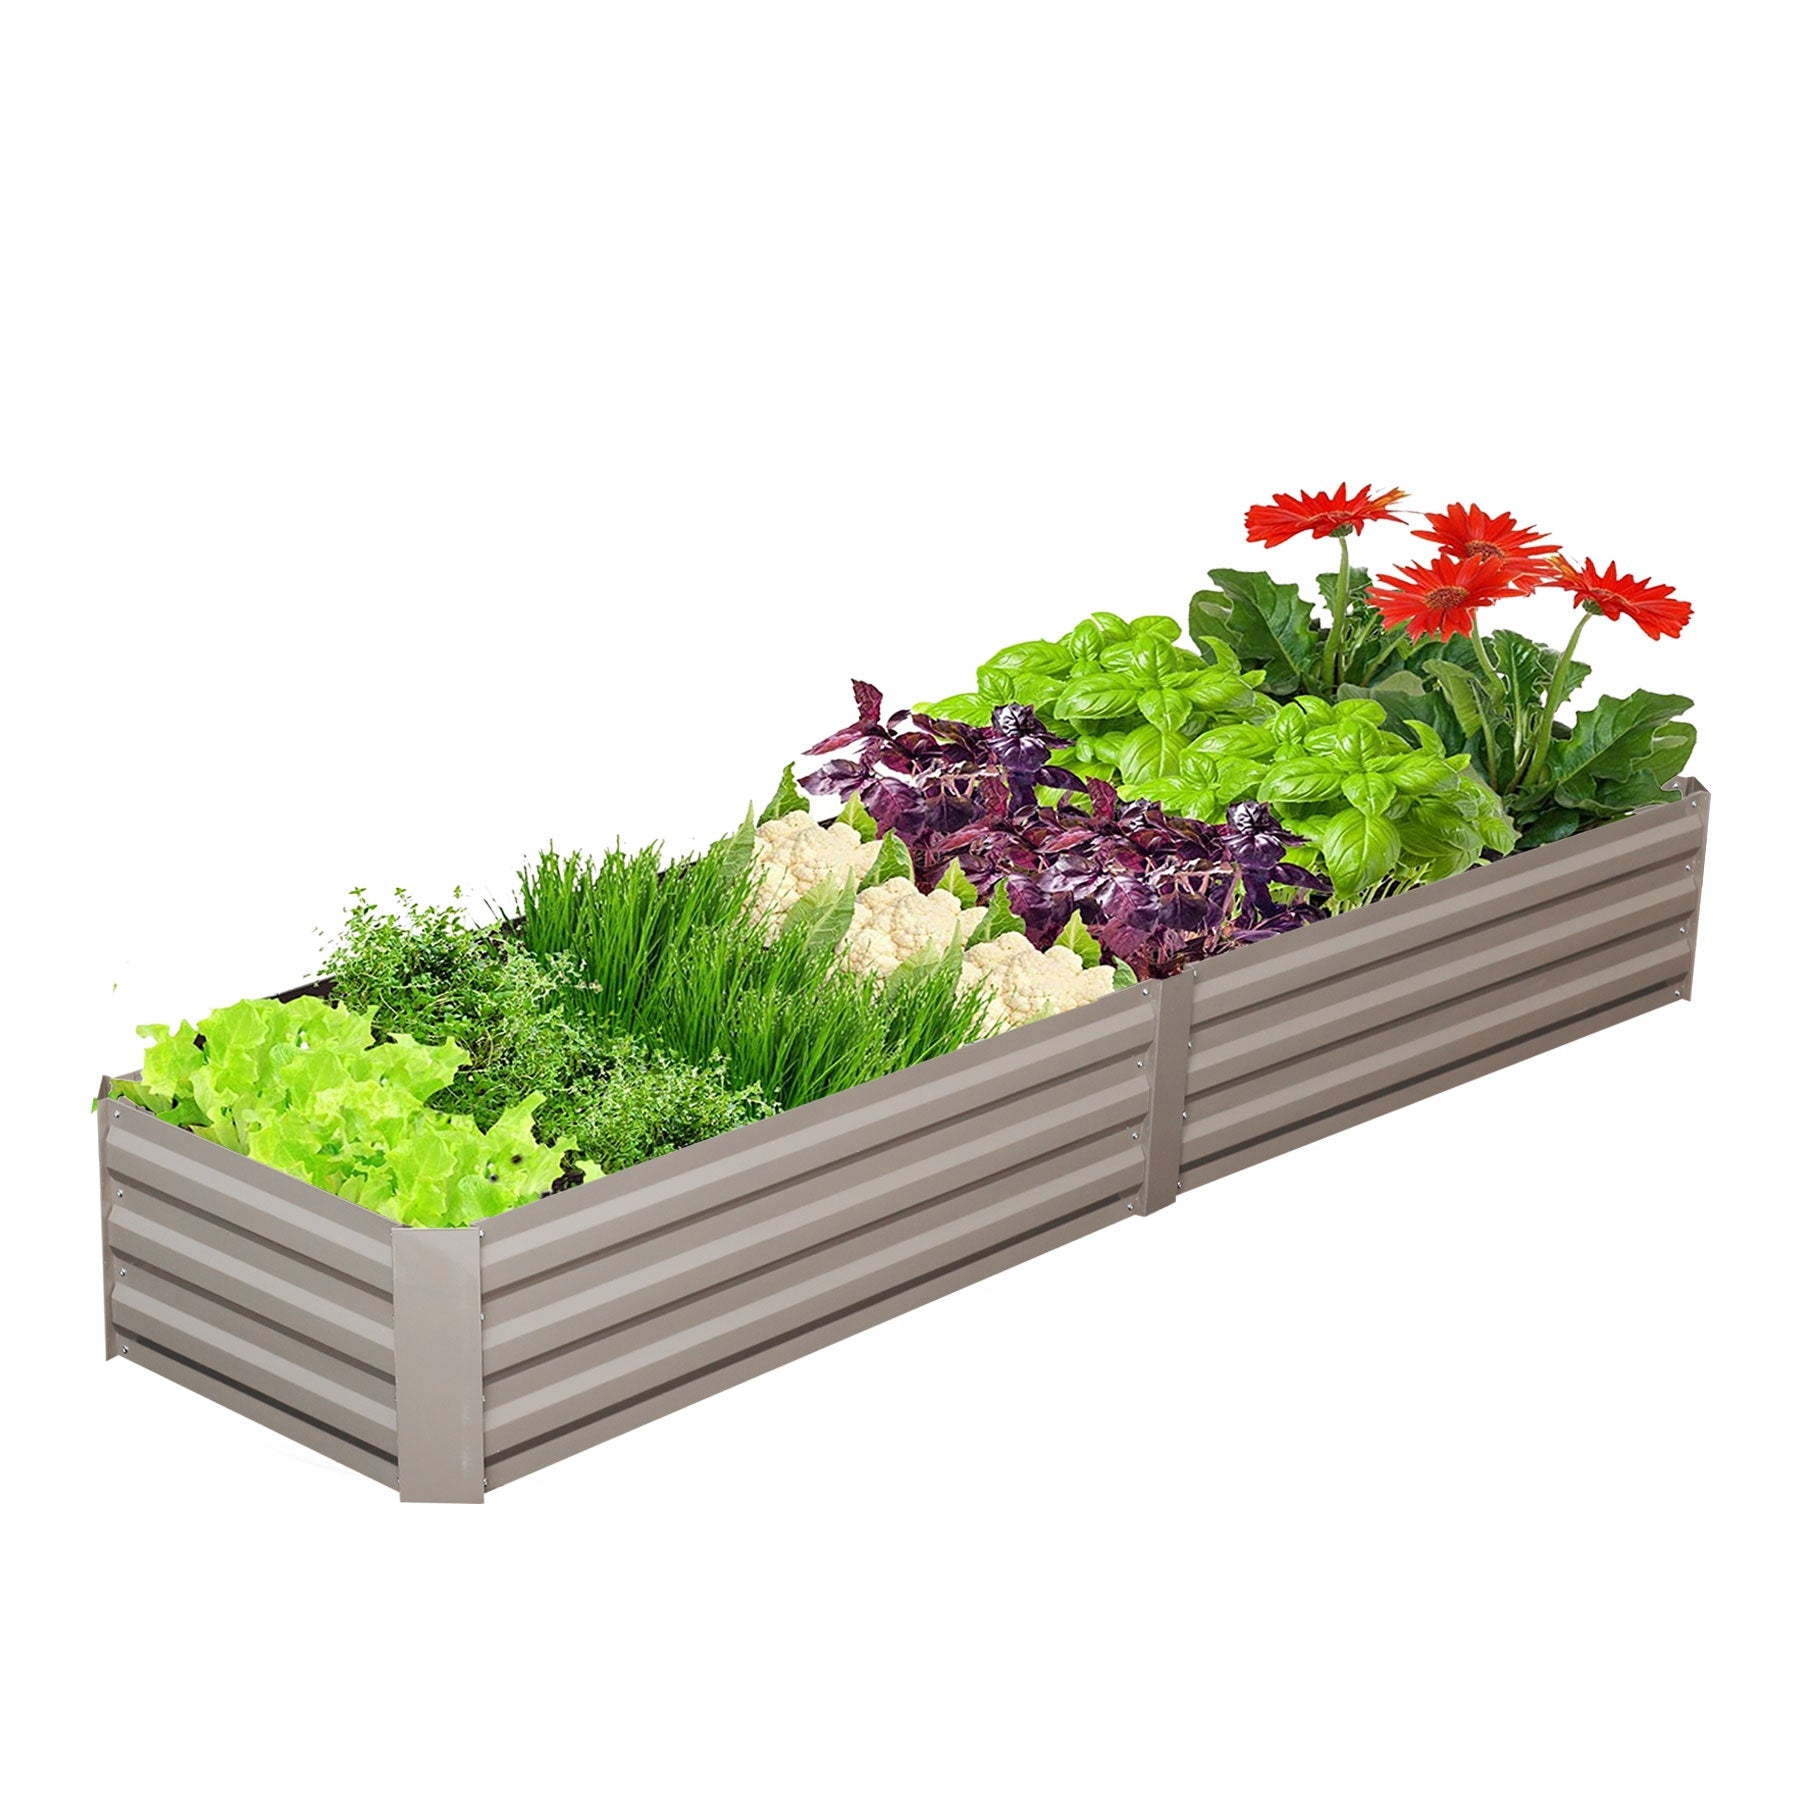 Raised Metal Garden Bed,Corrugated Steel Planter For Flowers And Vegetables,Metallic Gray